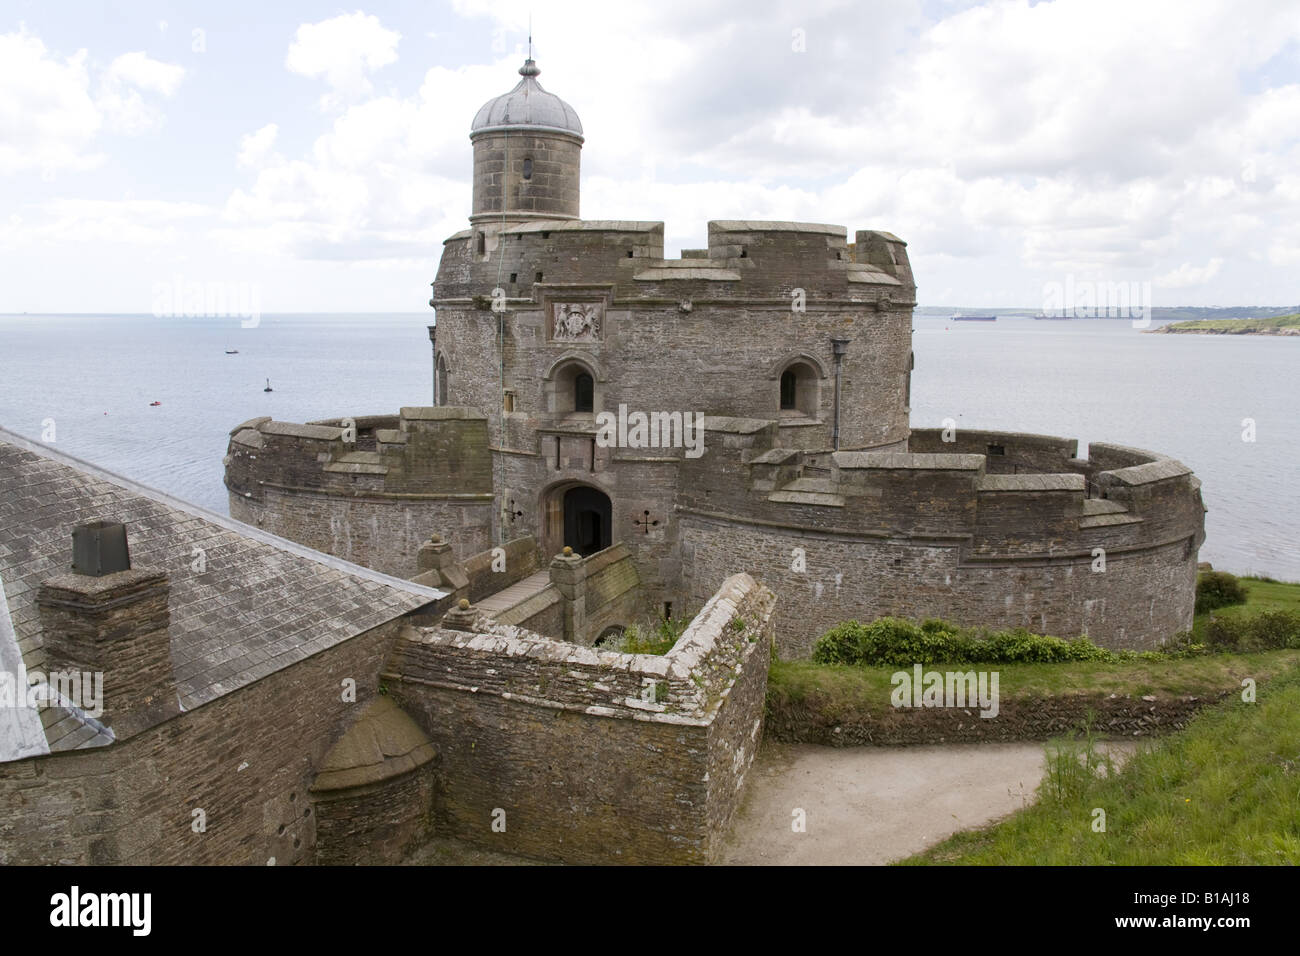 St Mawes Château Tudor, Cornwall, Angleterre. Banque D'Images